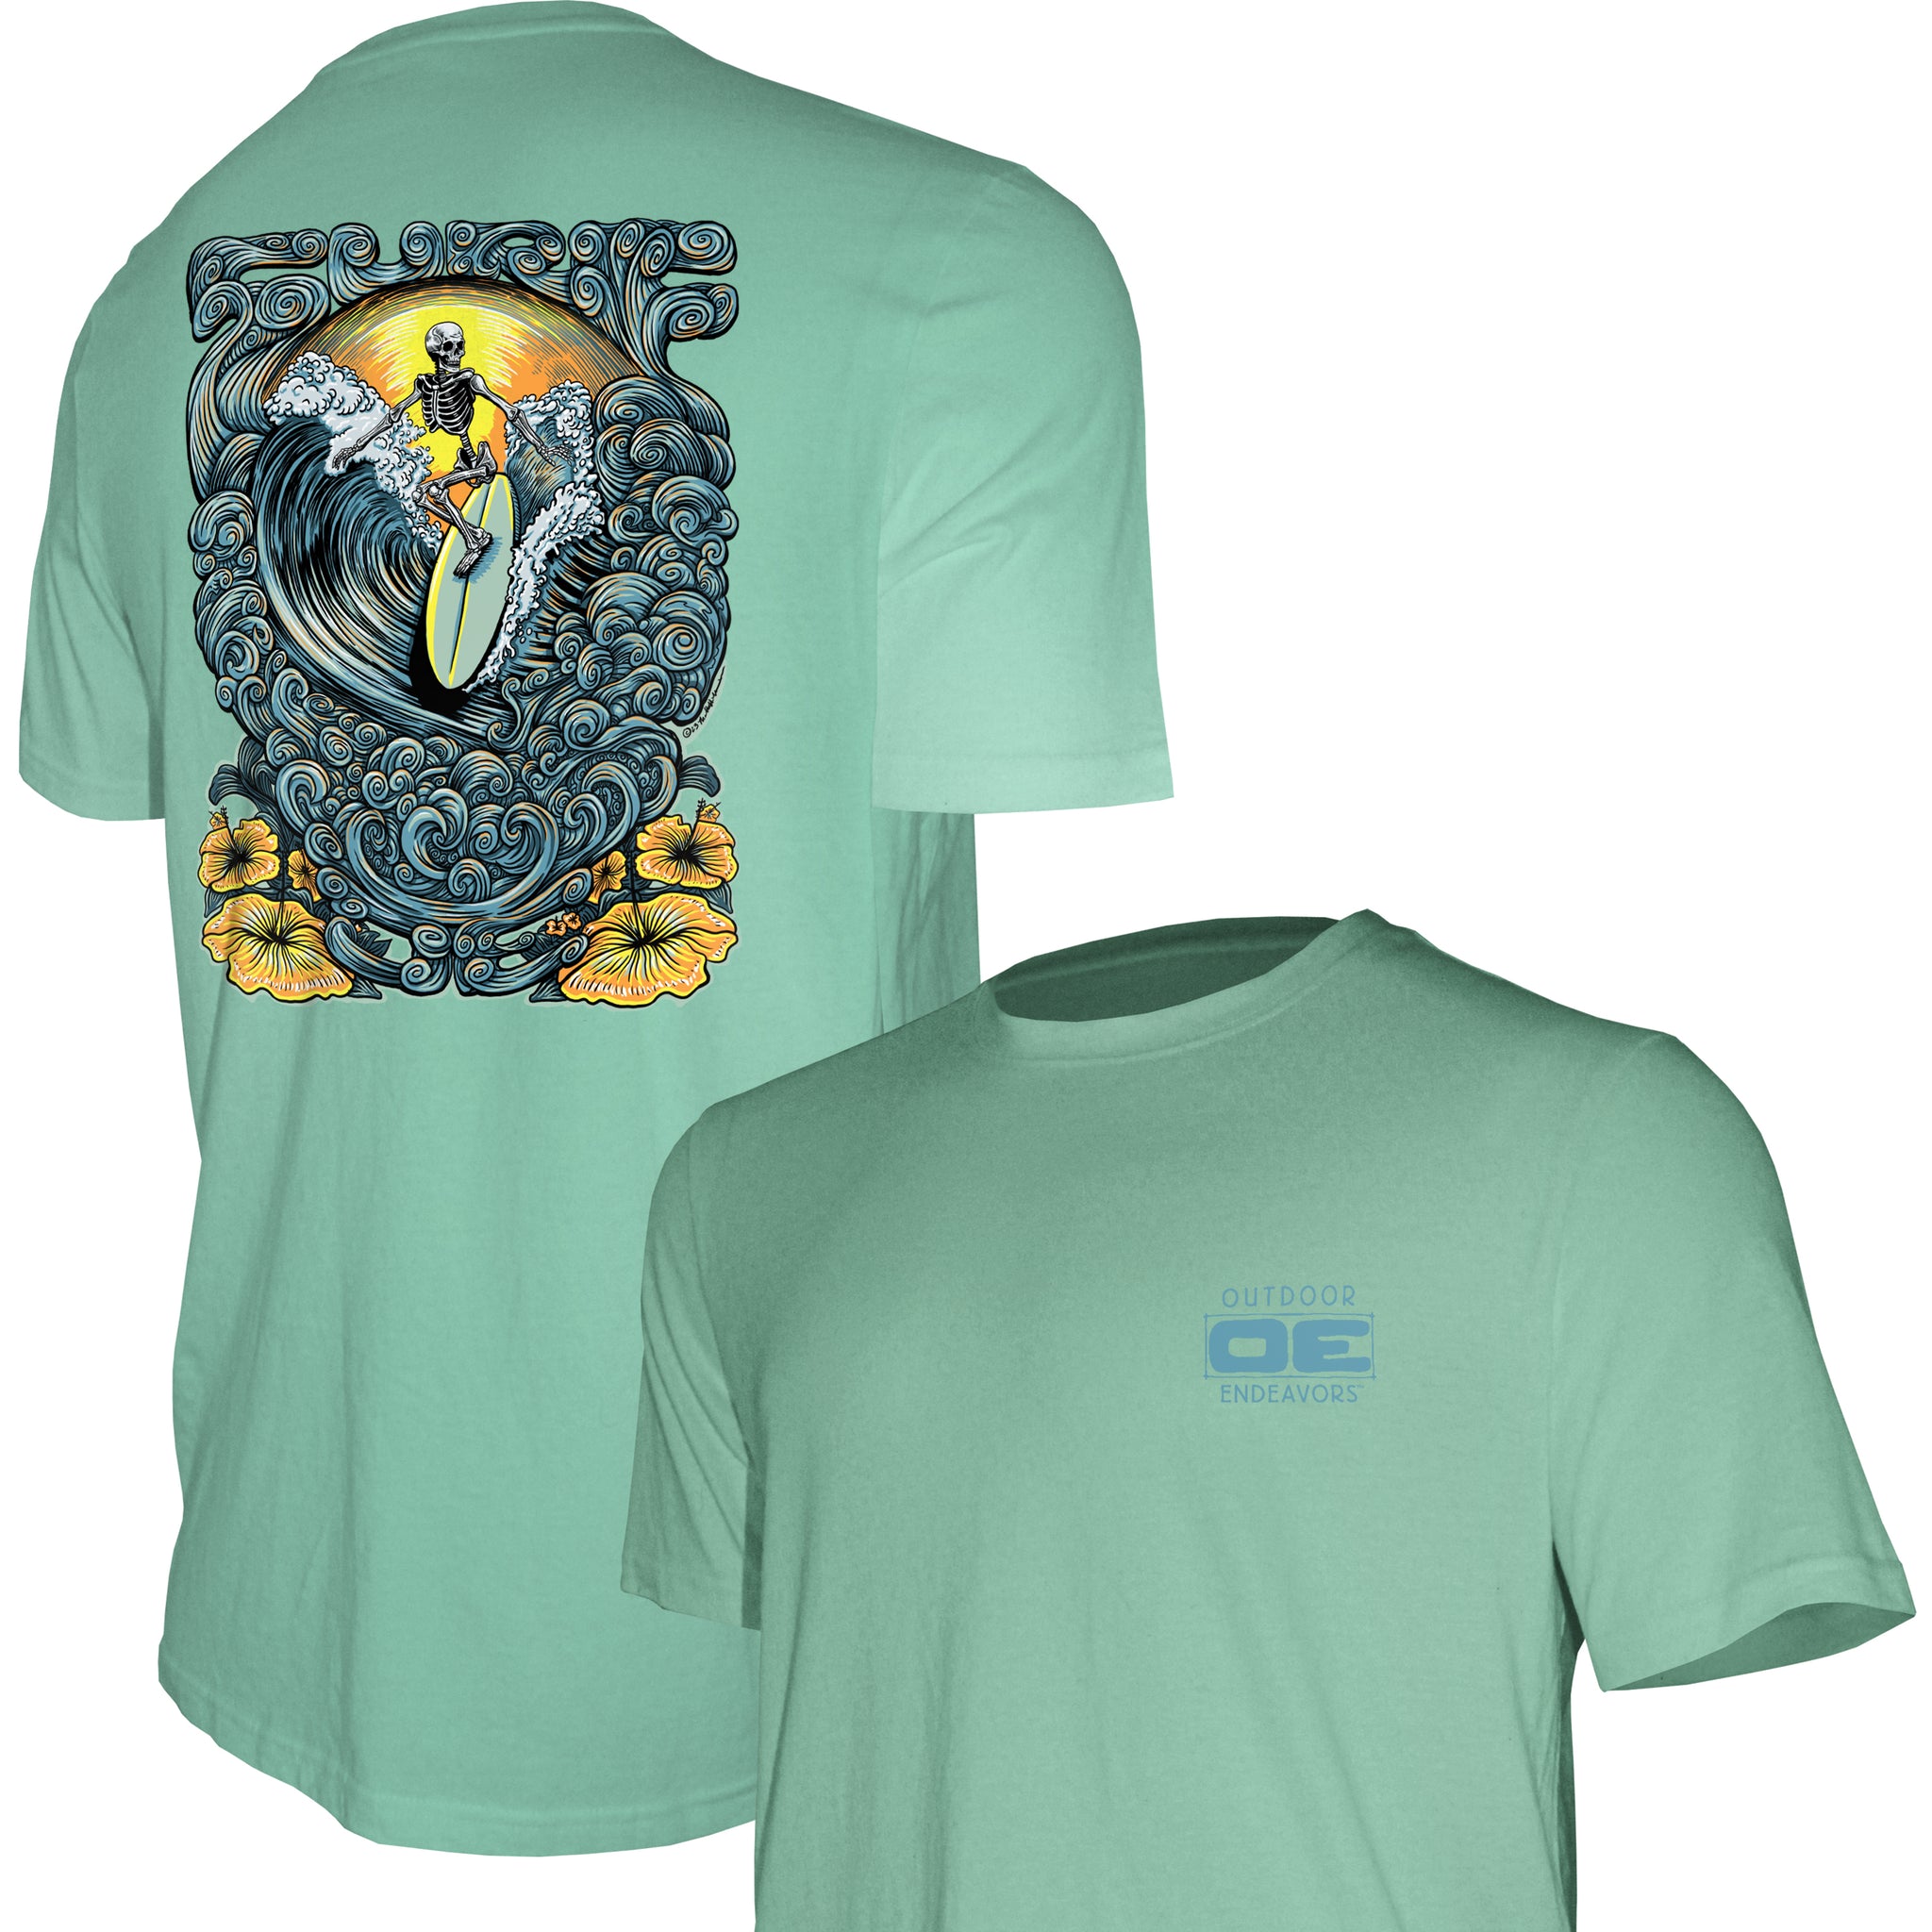 Outdoor Endeavors Out There- American Made Tee - SURF BACK